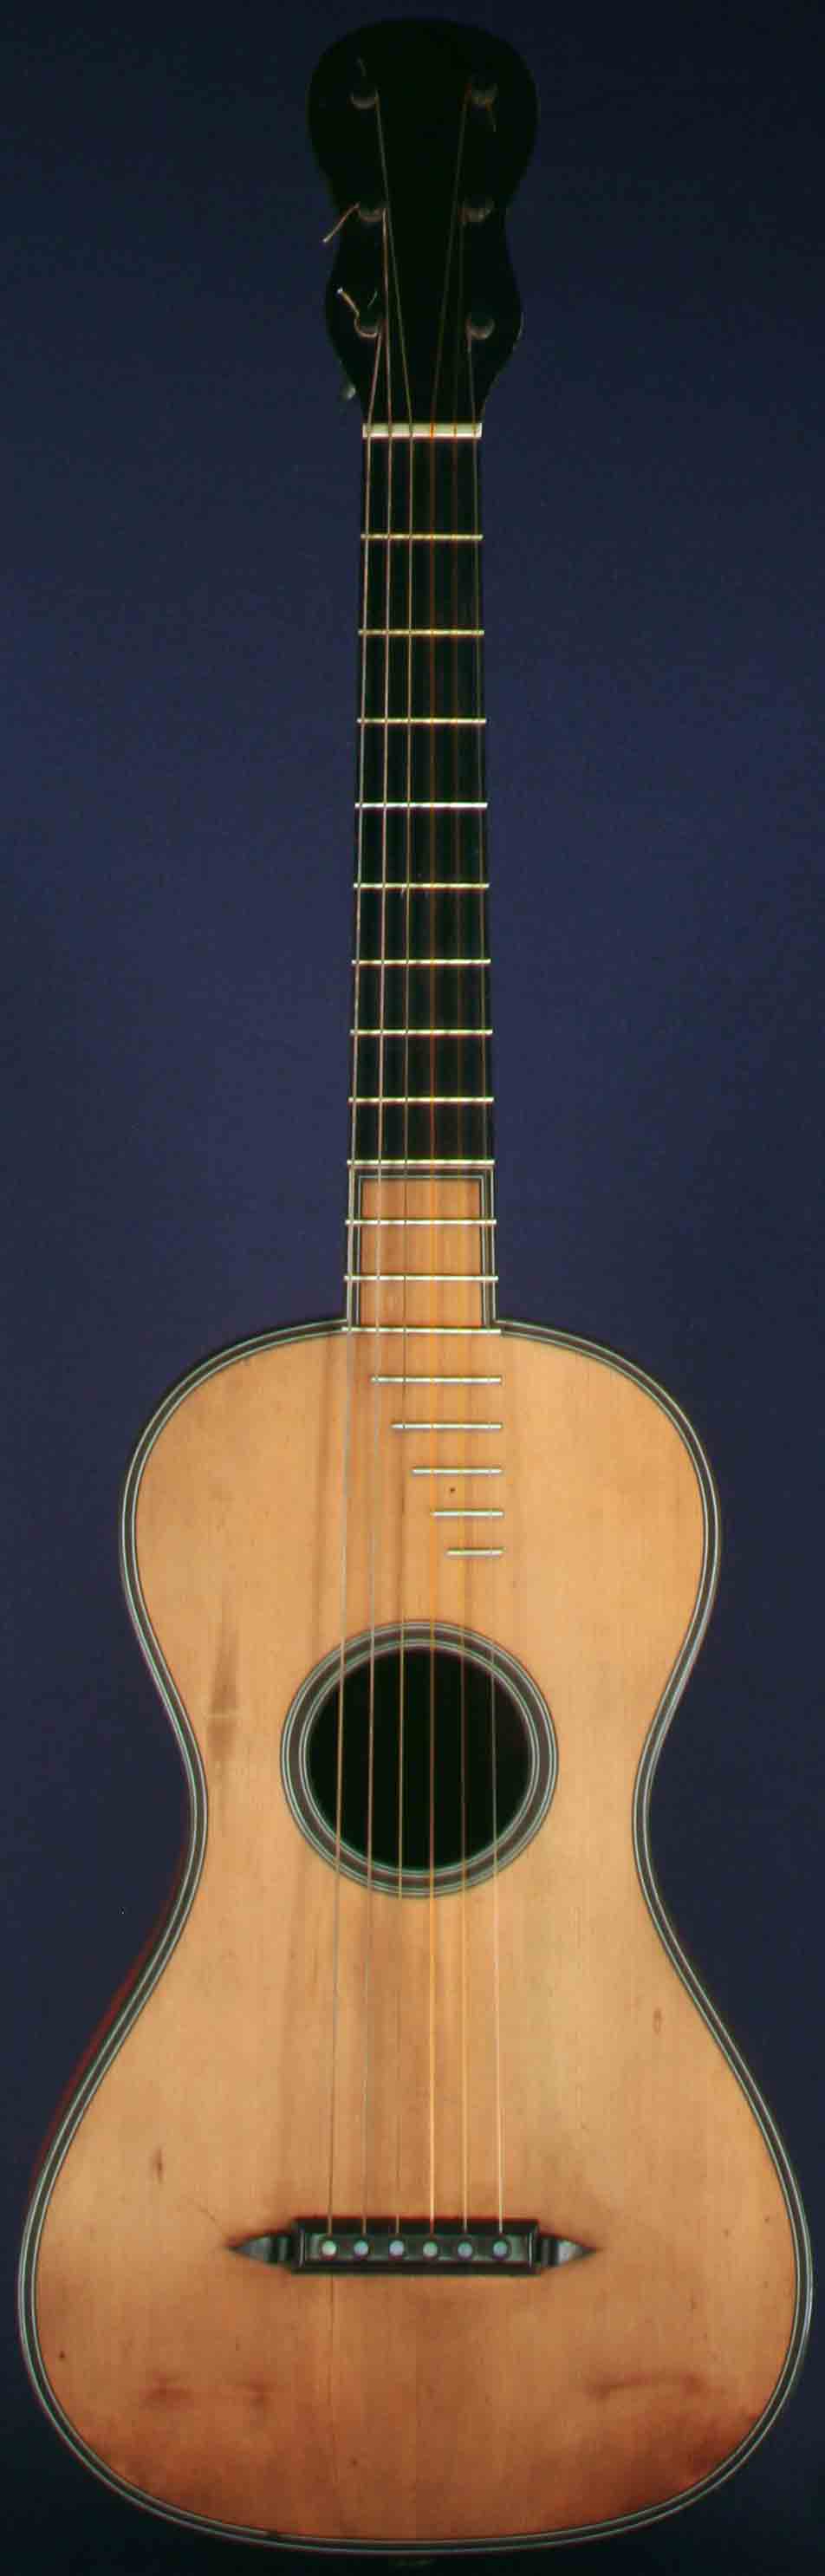 Early Musical Instruments part of the Bruderlin Collection, antique Romantic Guitar by François Breton around 1810